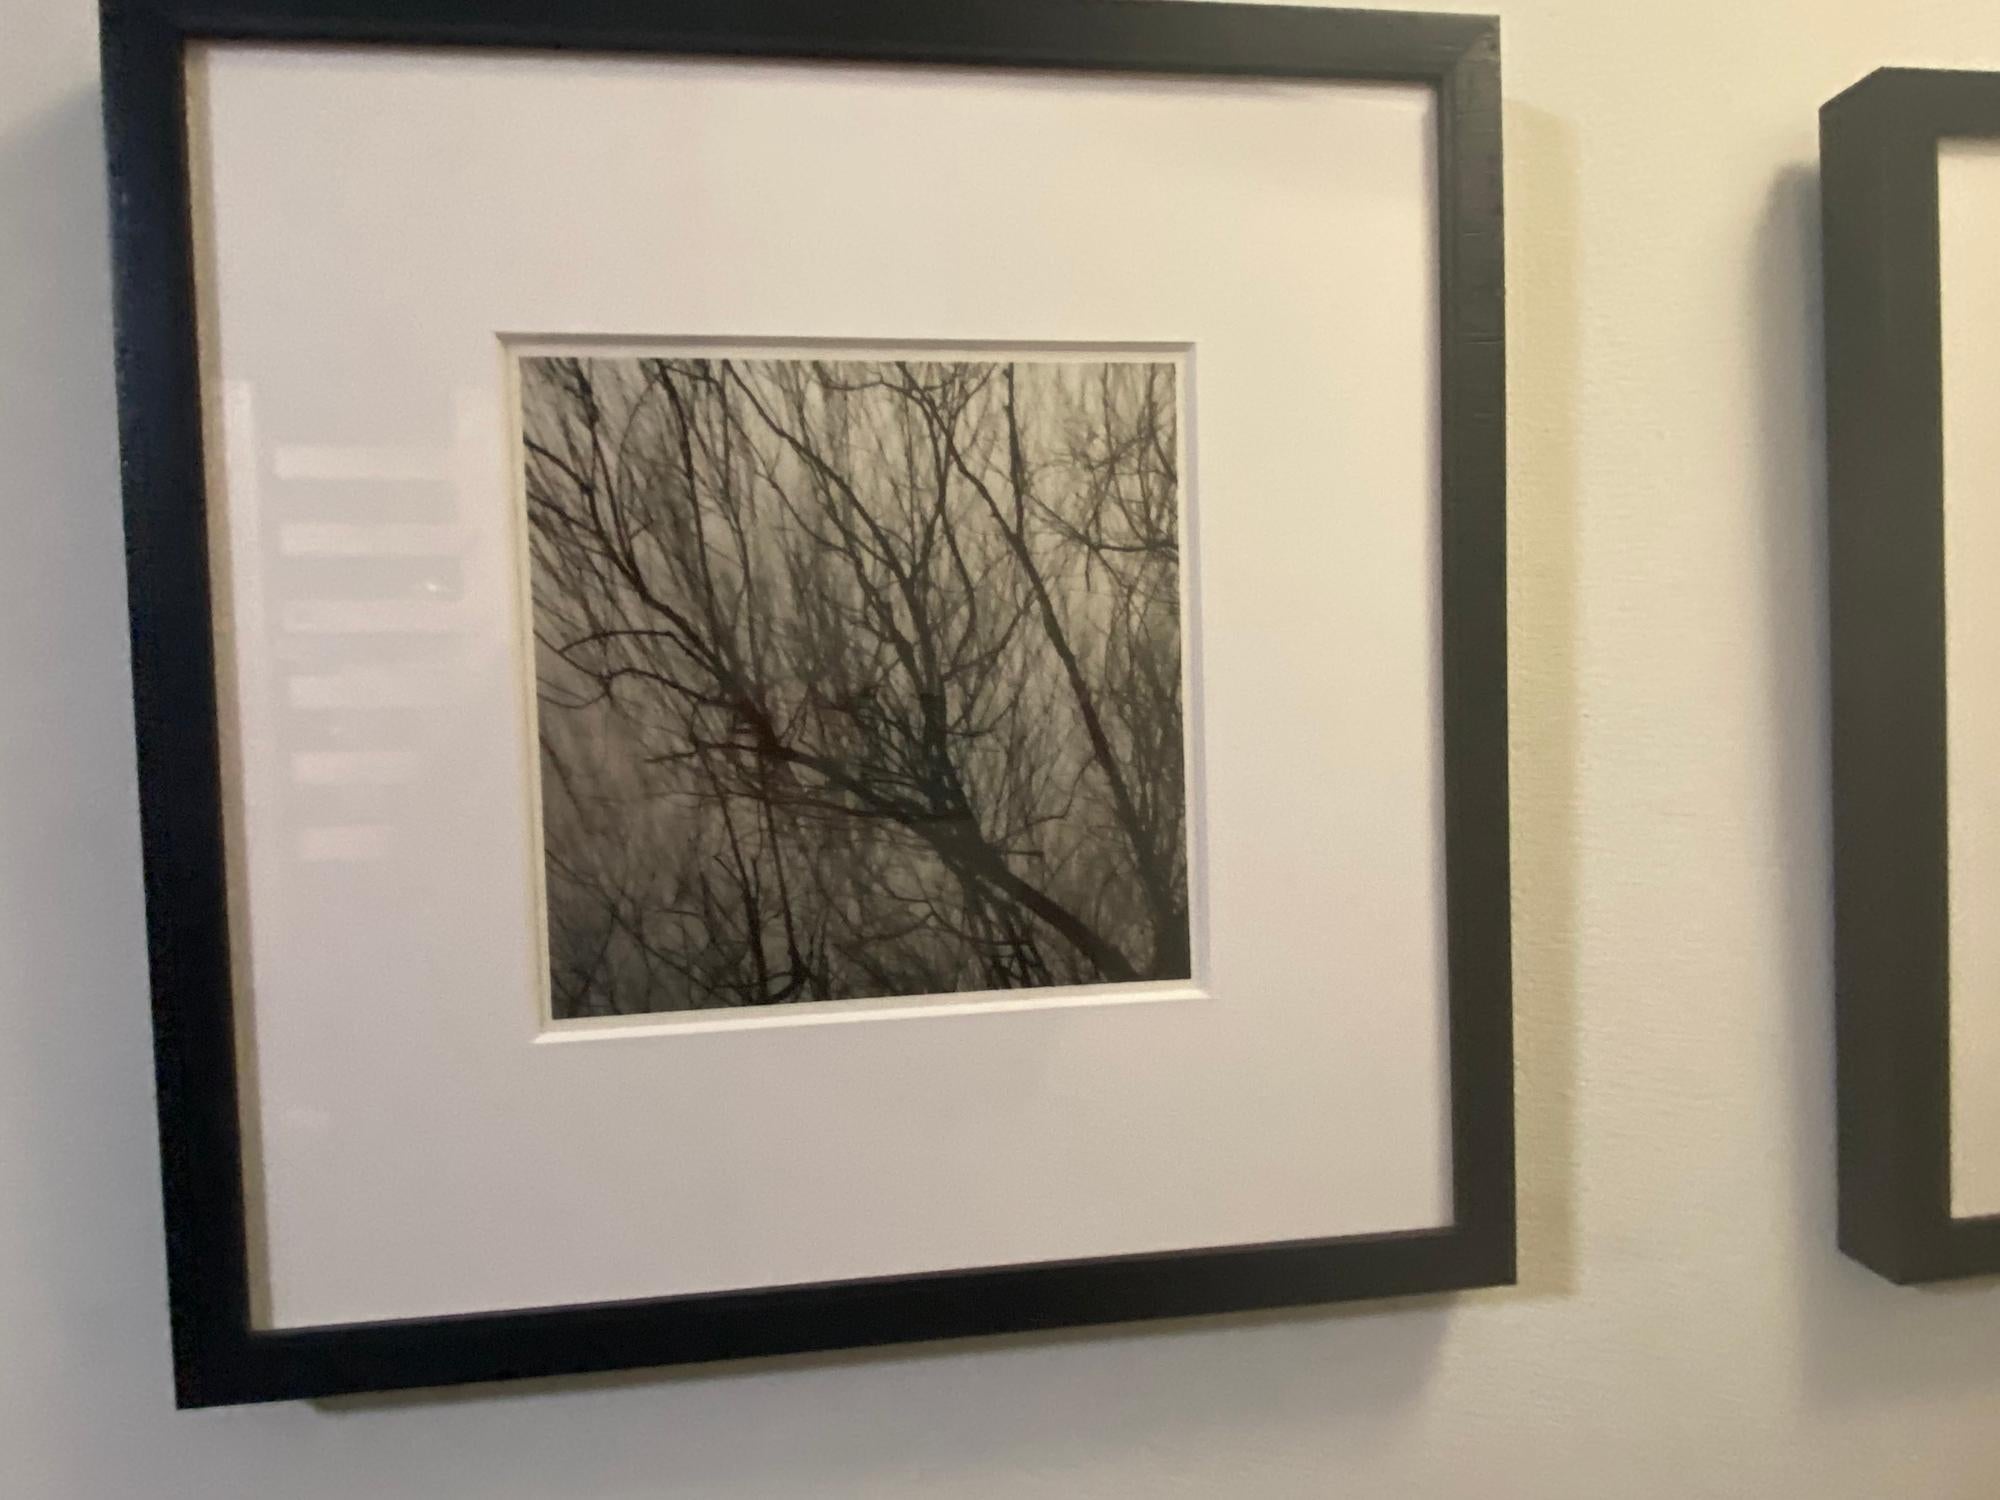 Entanglement #1 (The Embrace) - FRAMED black &white contemporary film photograph - Photograph by Kimberly Schneider Photography